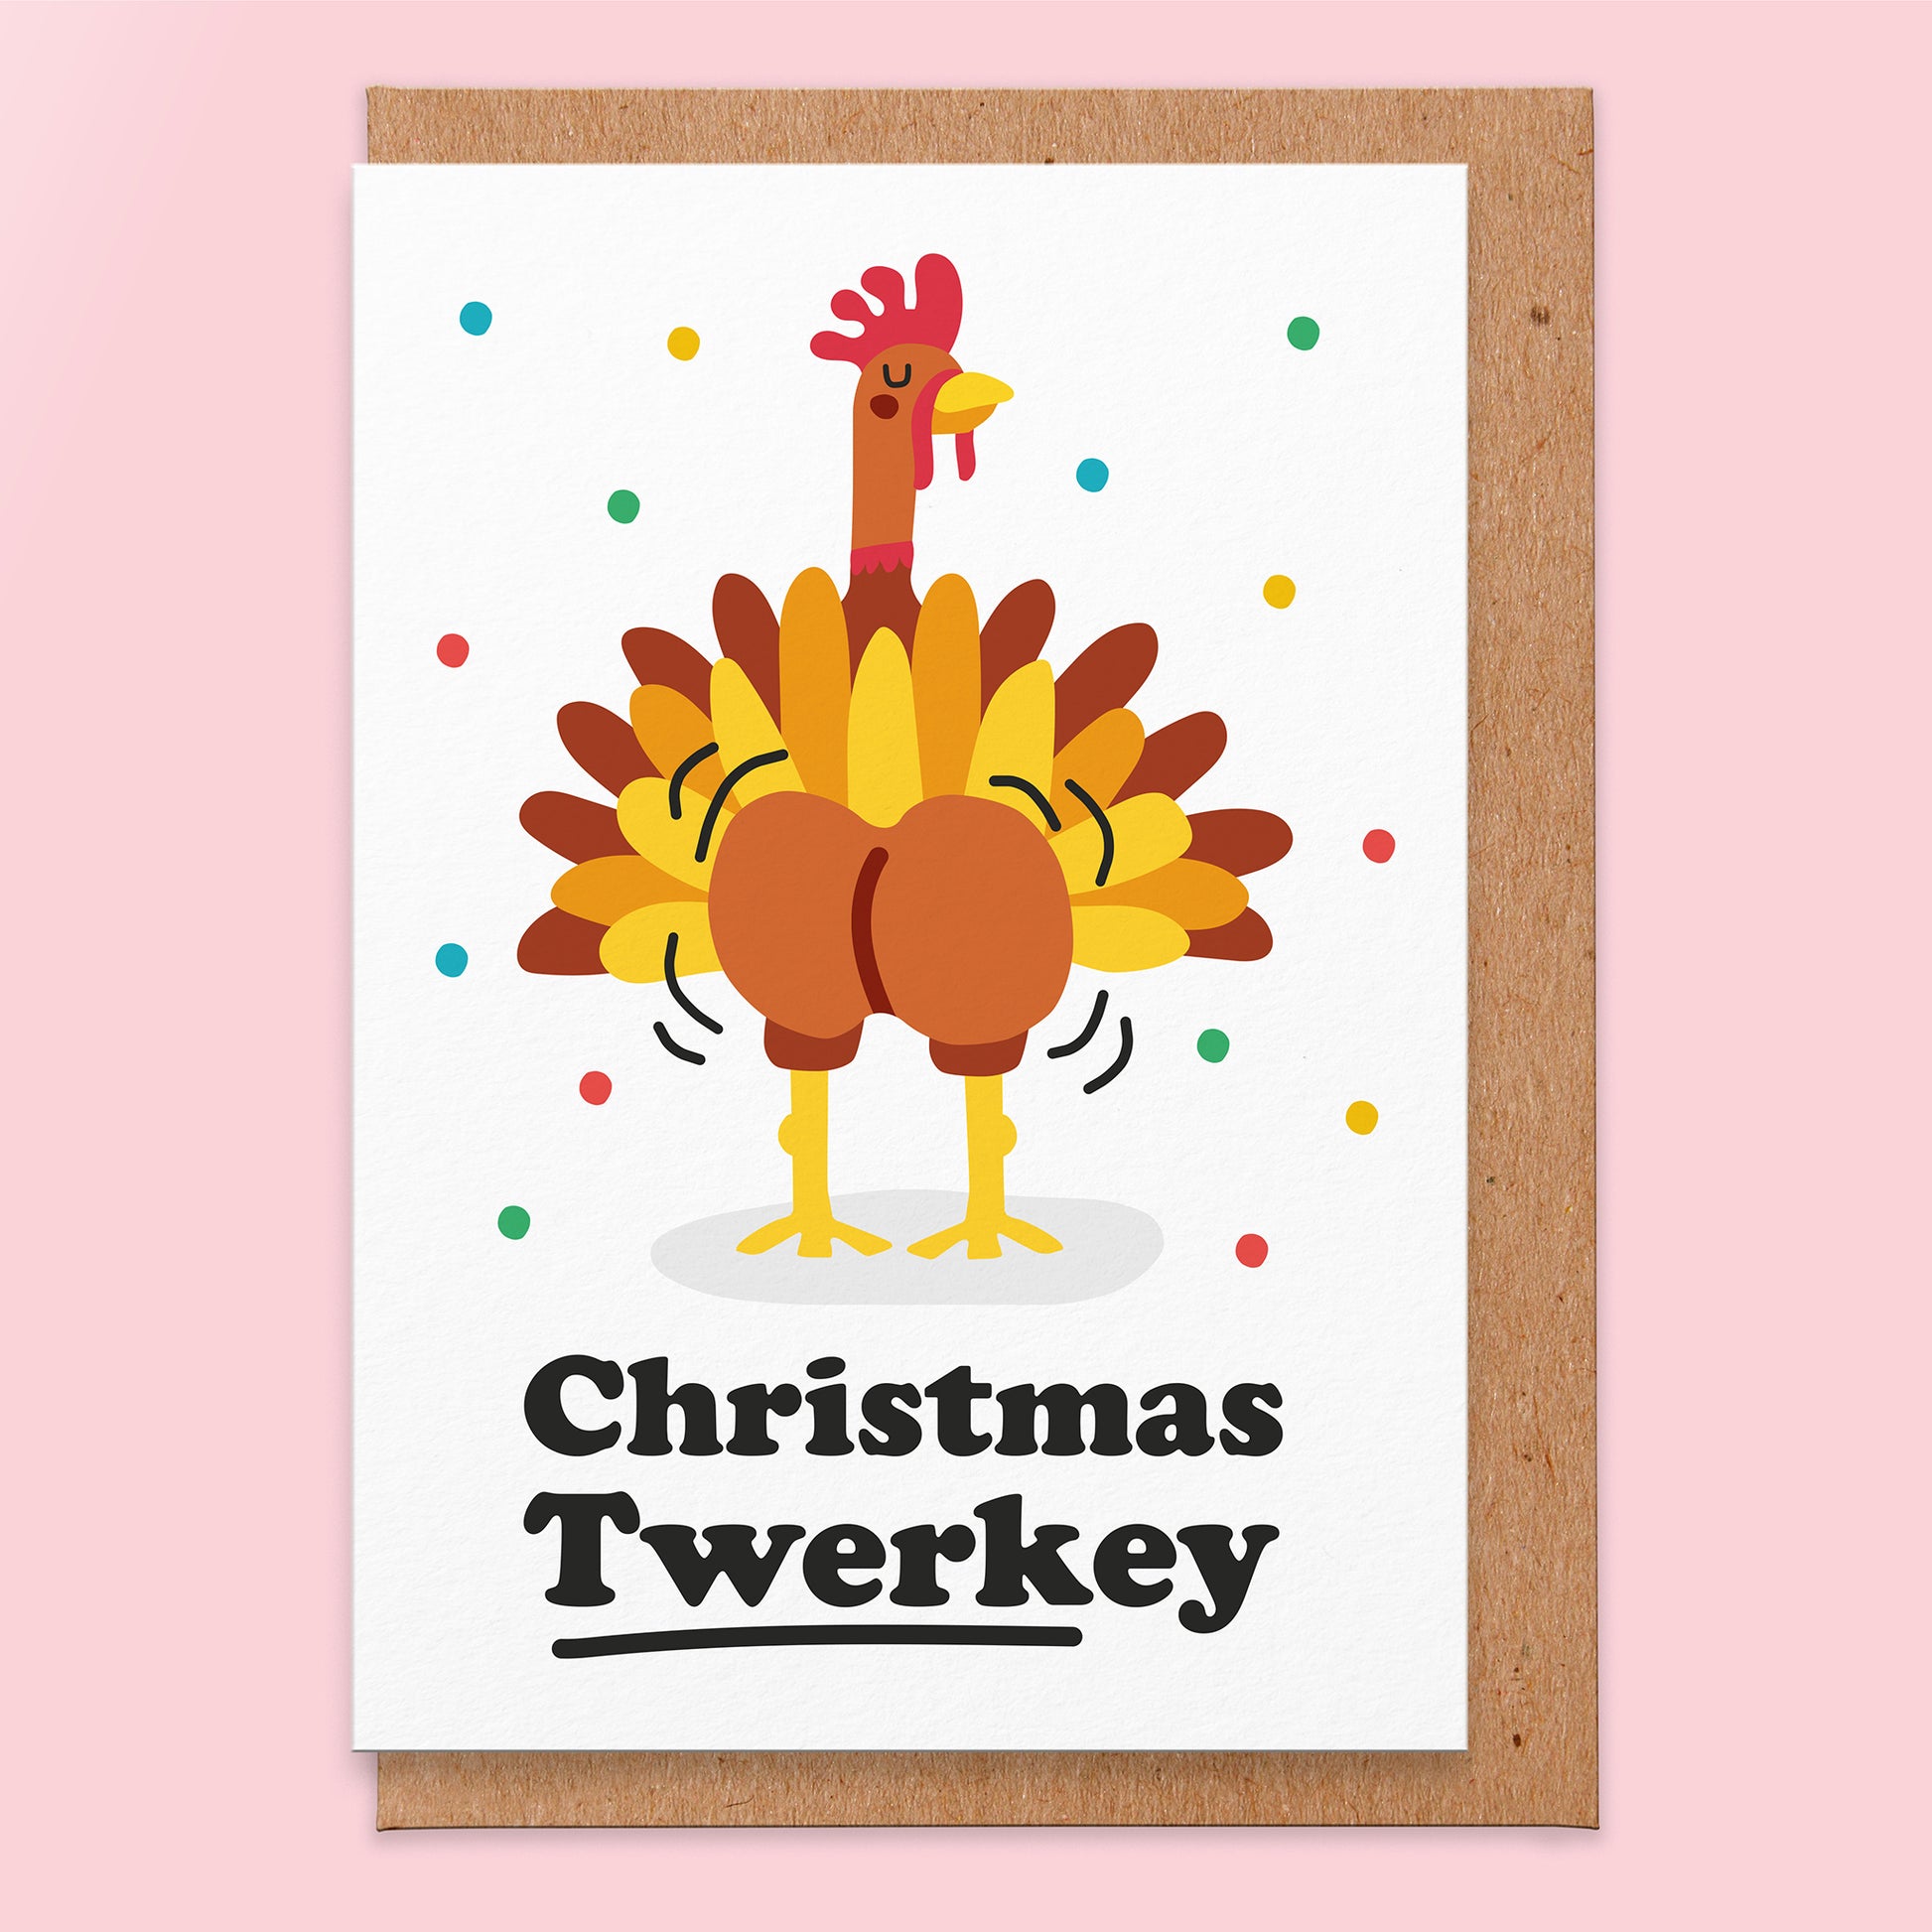 Christmas card with an illustration of a turkey twerking and the text reads christmas twerkey.